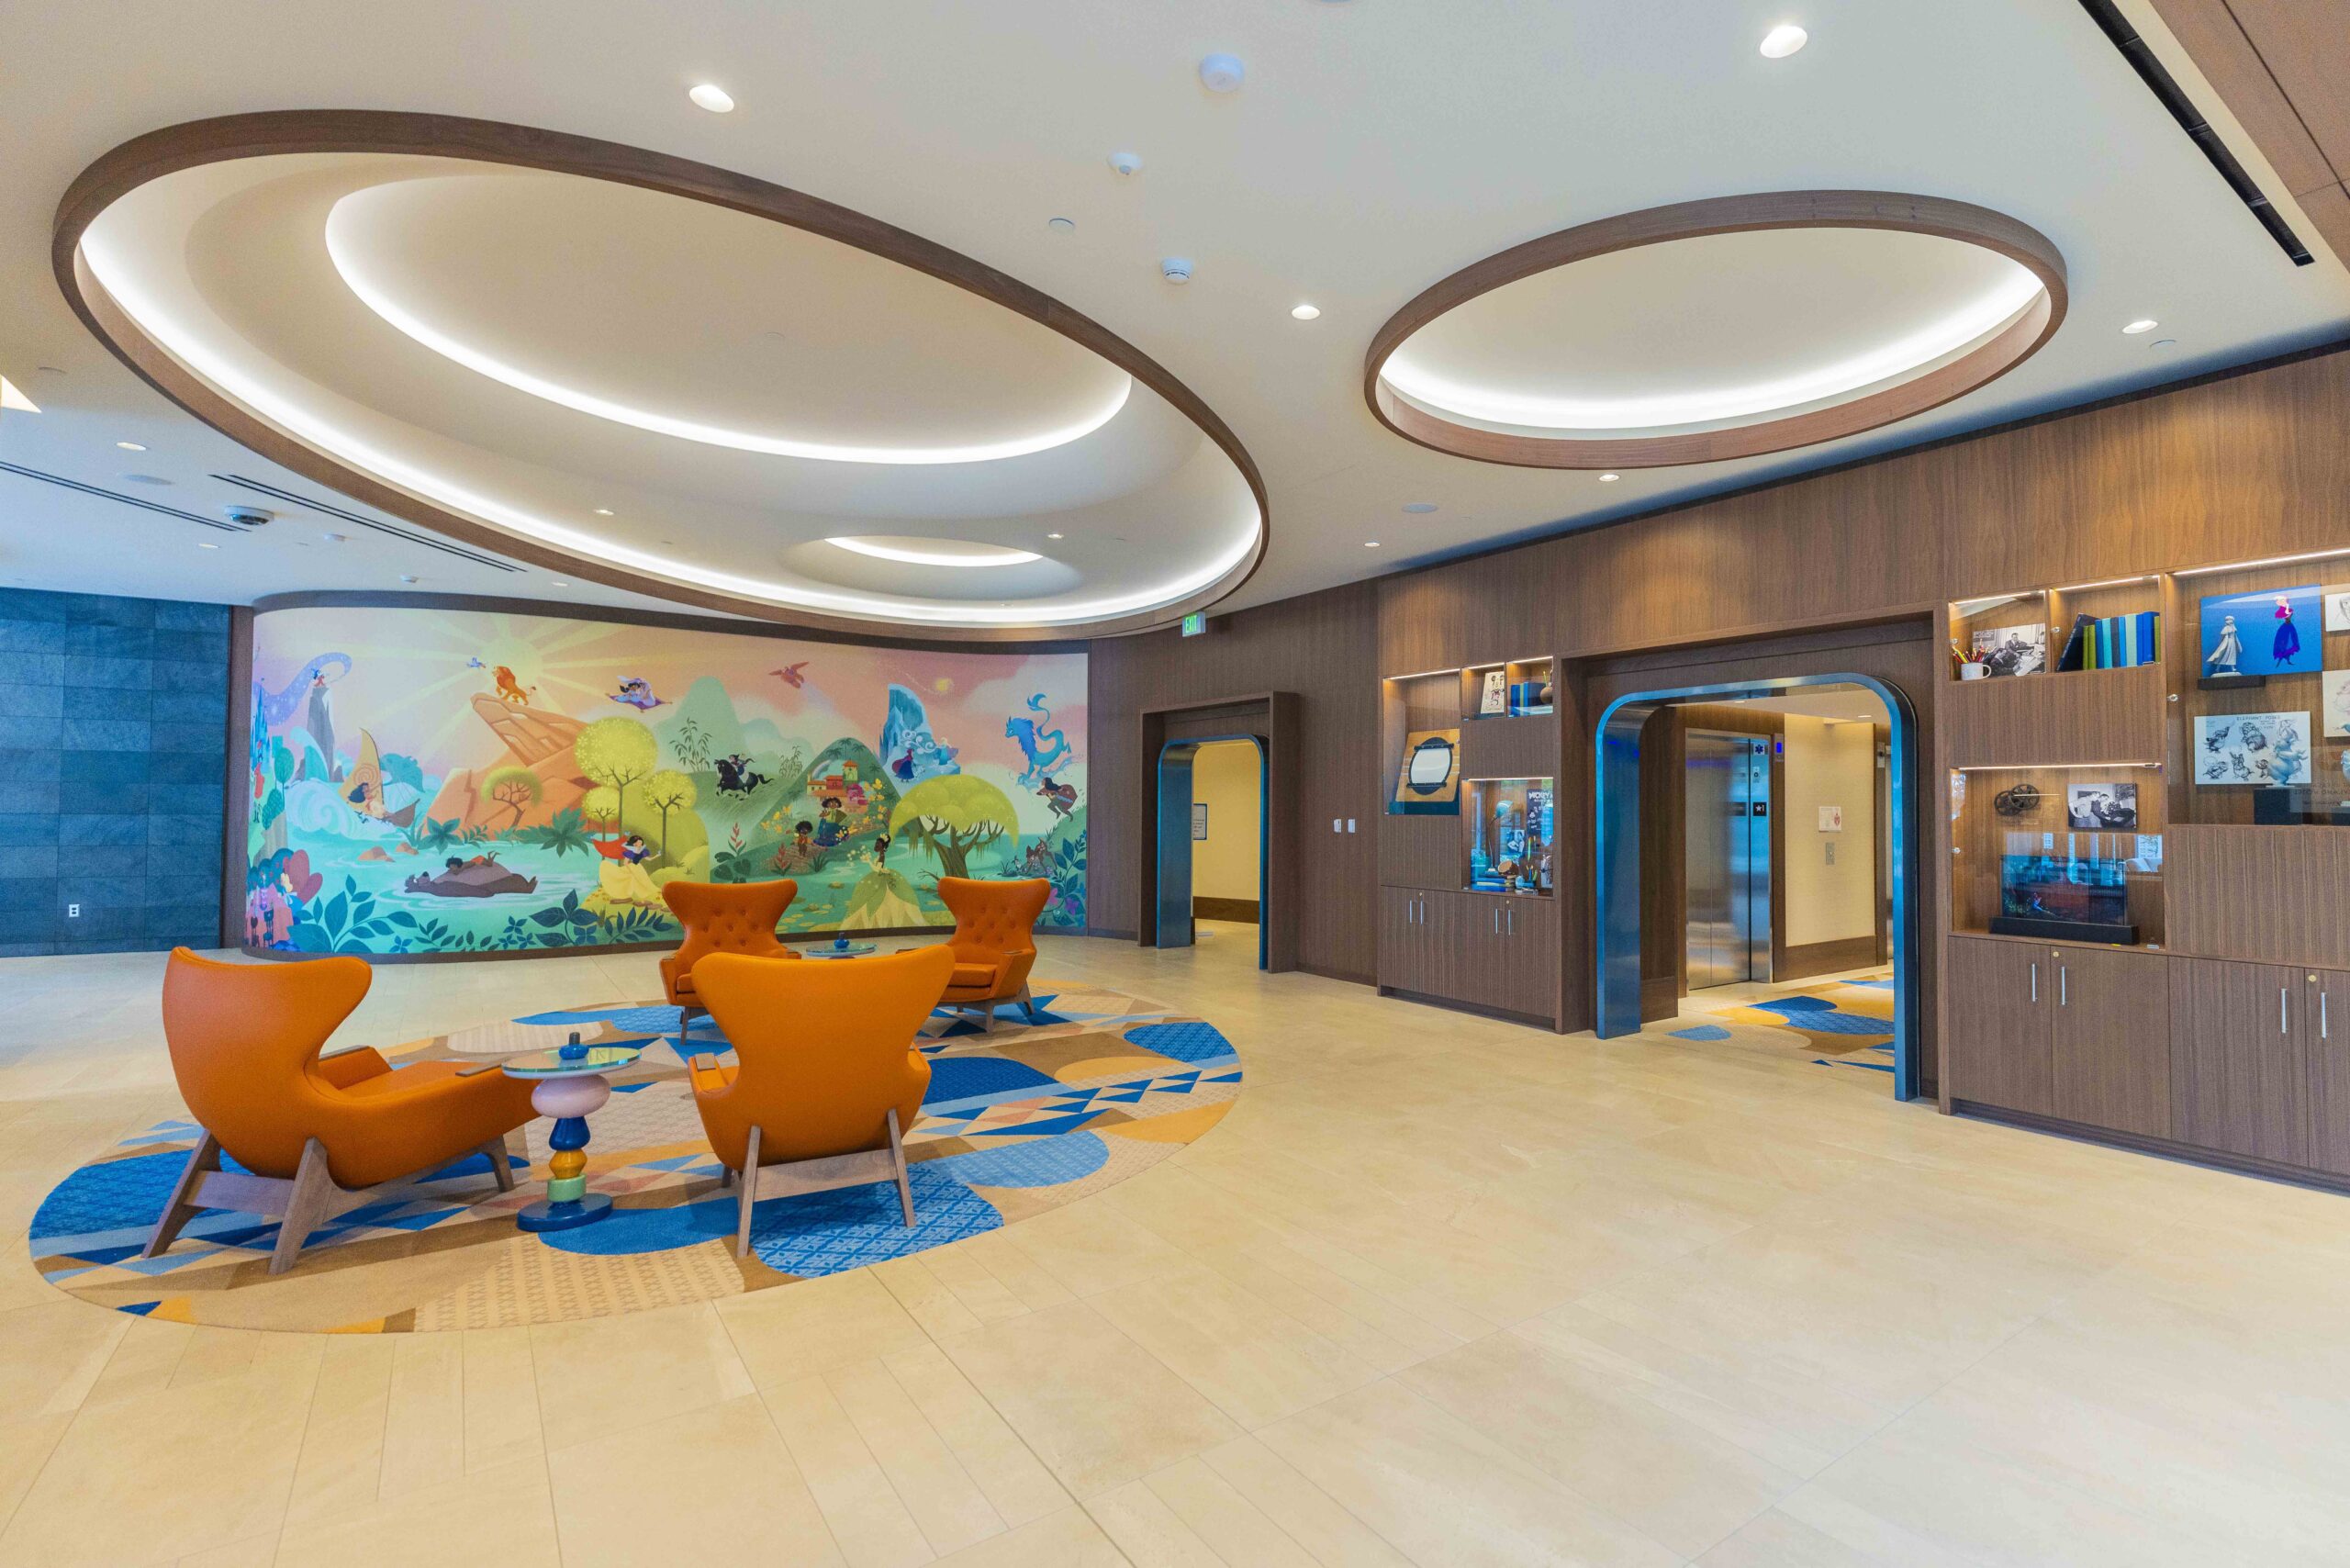 Guests will see beloved Disney characters and stories reflected in the theming of The Villas at Disneyland Hotel at the Disneyland Resort in Anaheim, Calif., including a one-of-a-kind mural in the lobby created by Disney Animation artist Lorelay Bové. (Christian Thompson/Disneyland Resort)